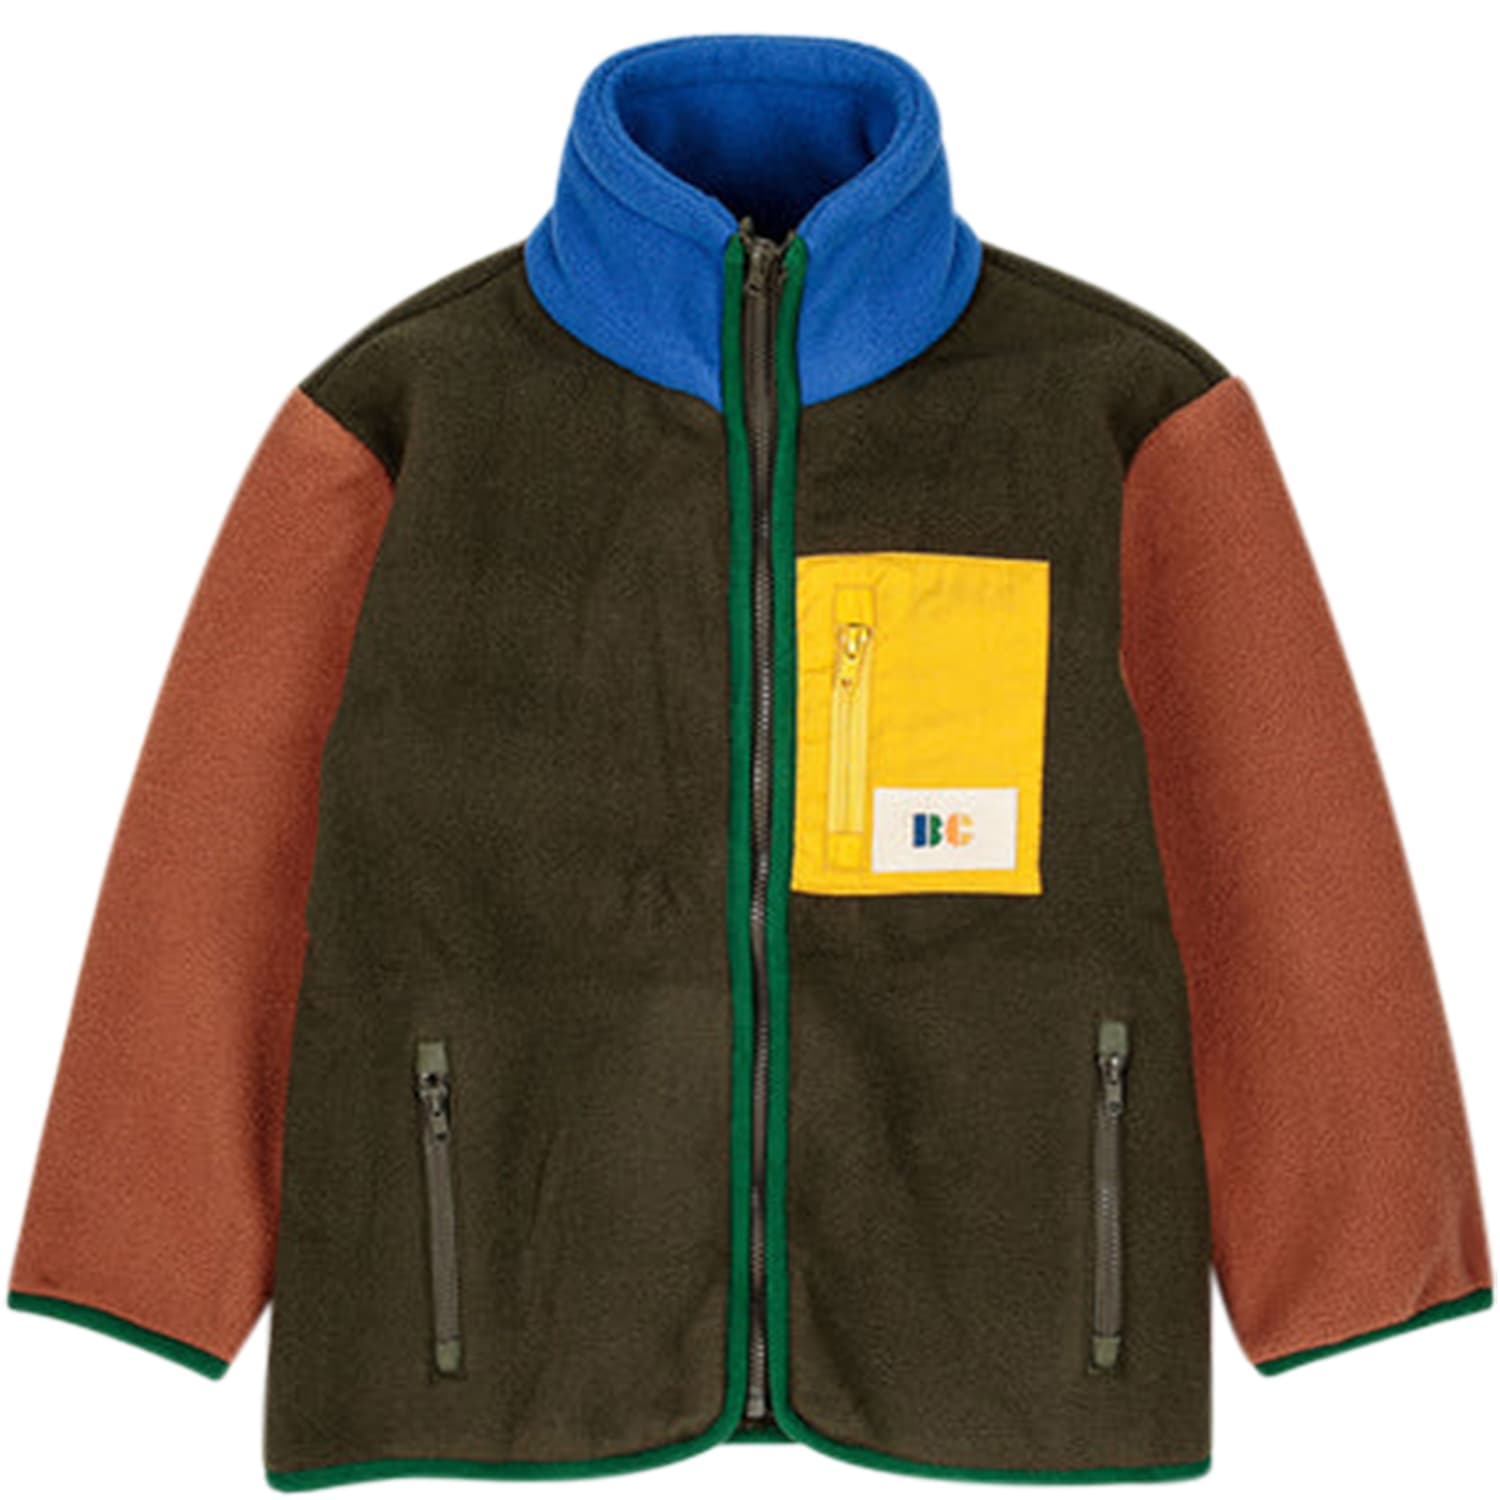 BOBO CHOSES GREEN JACKET FOR KIDS IN COLOR BLOCK